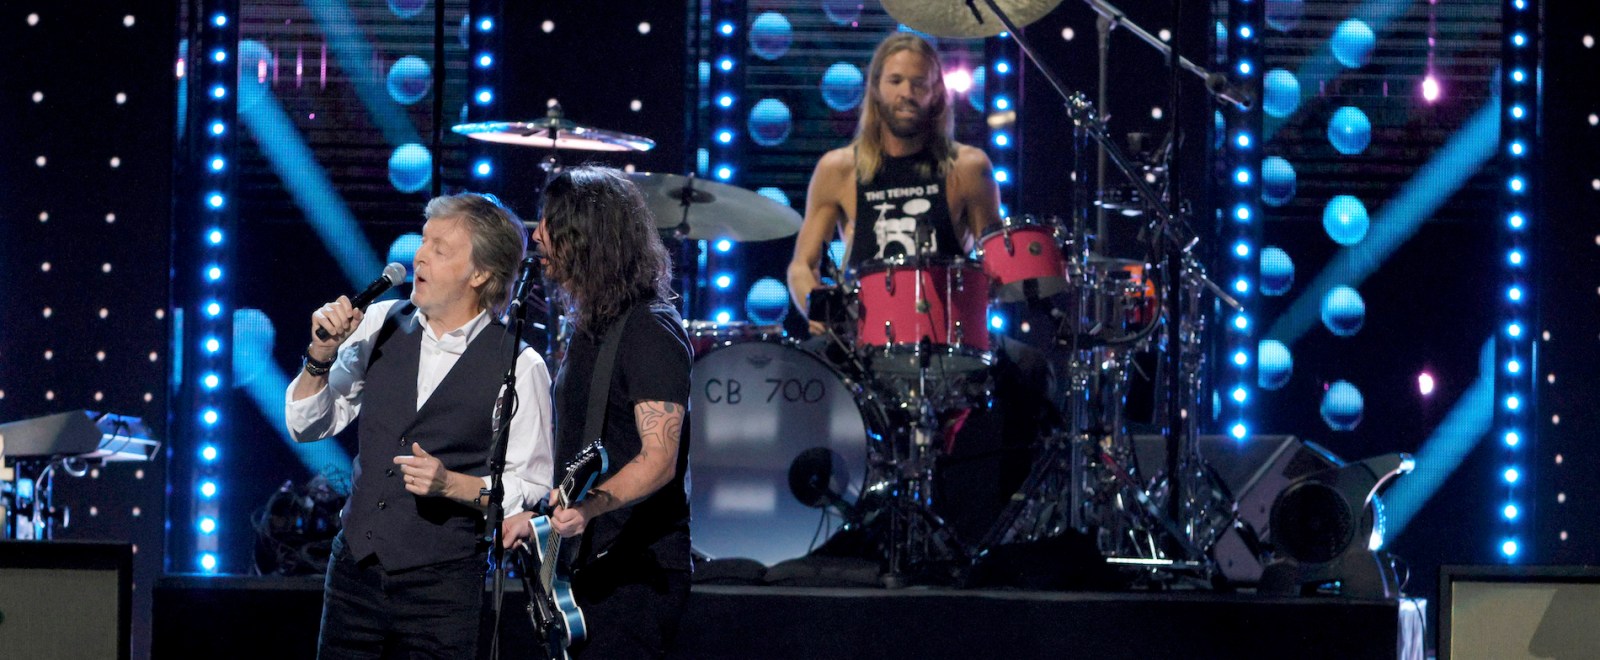 Paul McCartney Foo Fighters Dave Grohl Taylor Hawkins  36th Annual Rock & Roll Hall Of Fame Induction Ceremony 2021